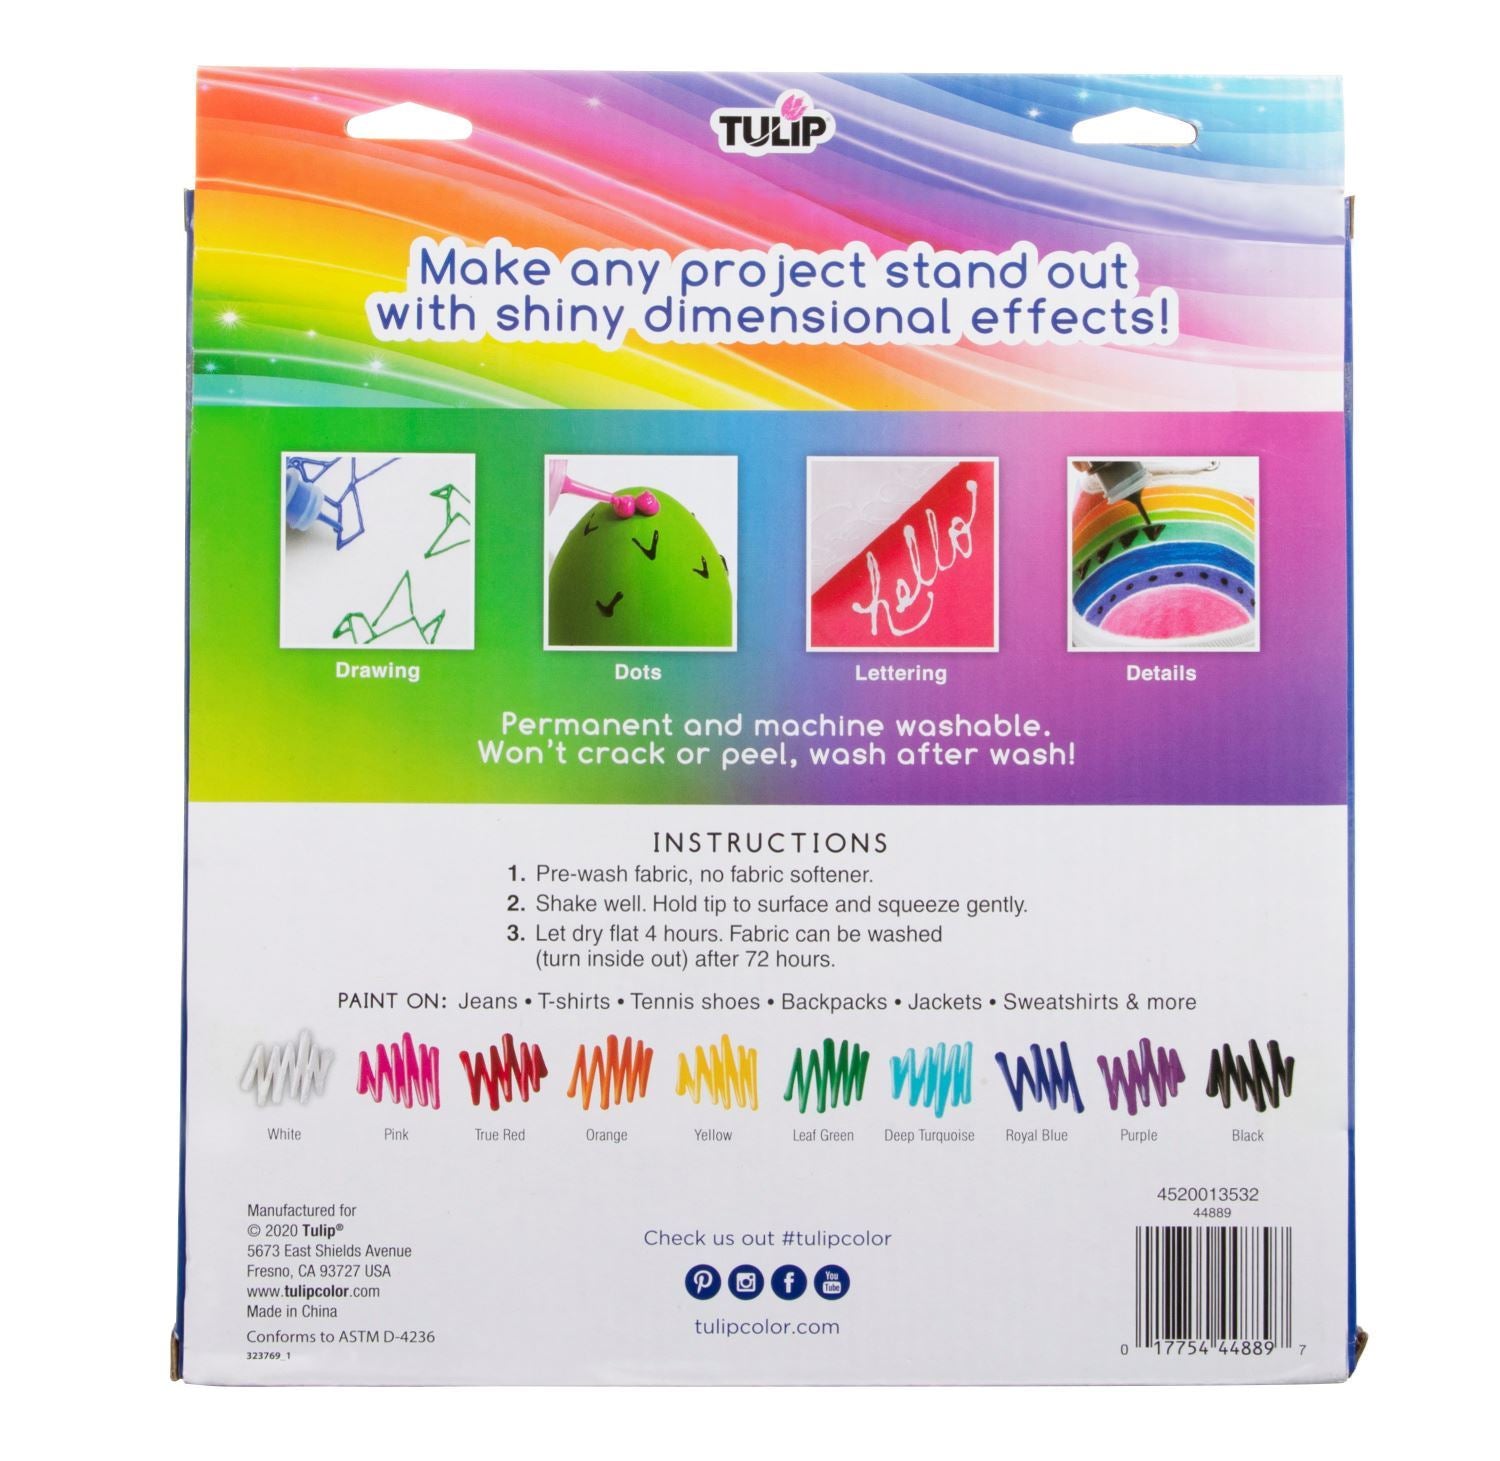 Tulip Dimensional Fabric Paint Rainbow Color Collection 1.25 fl oz 10 Pack - 3